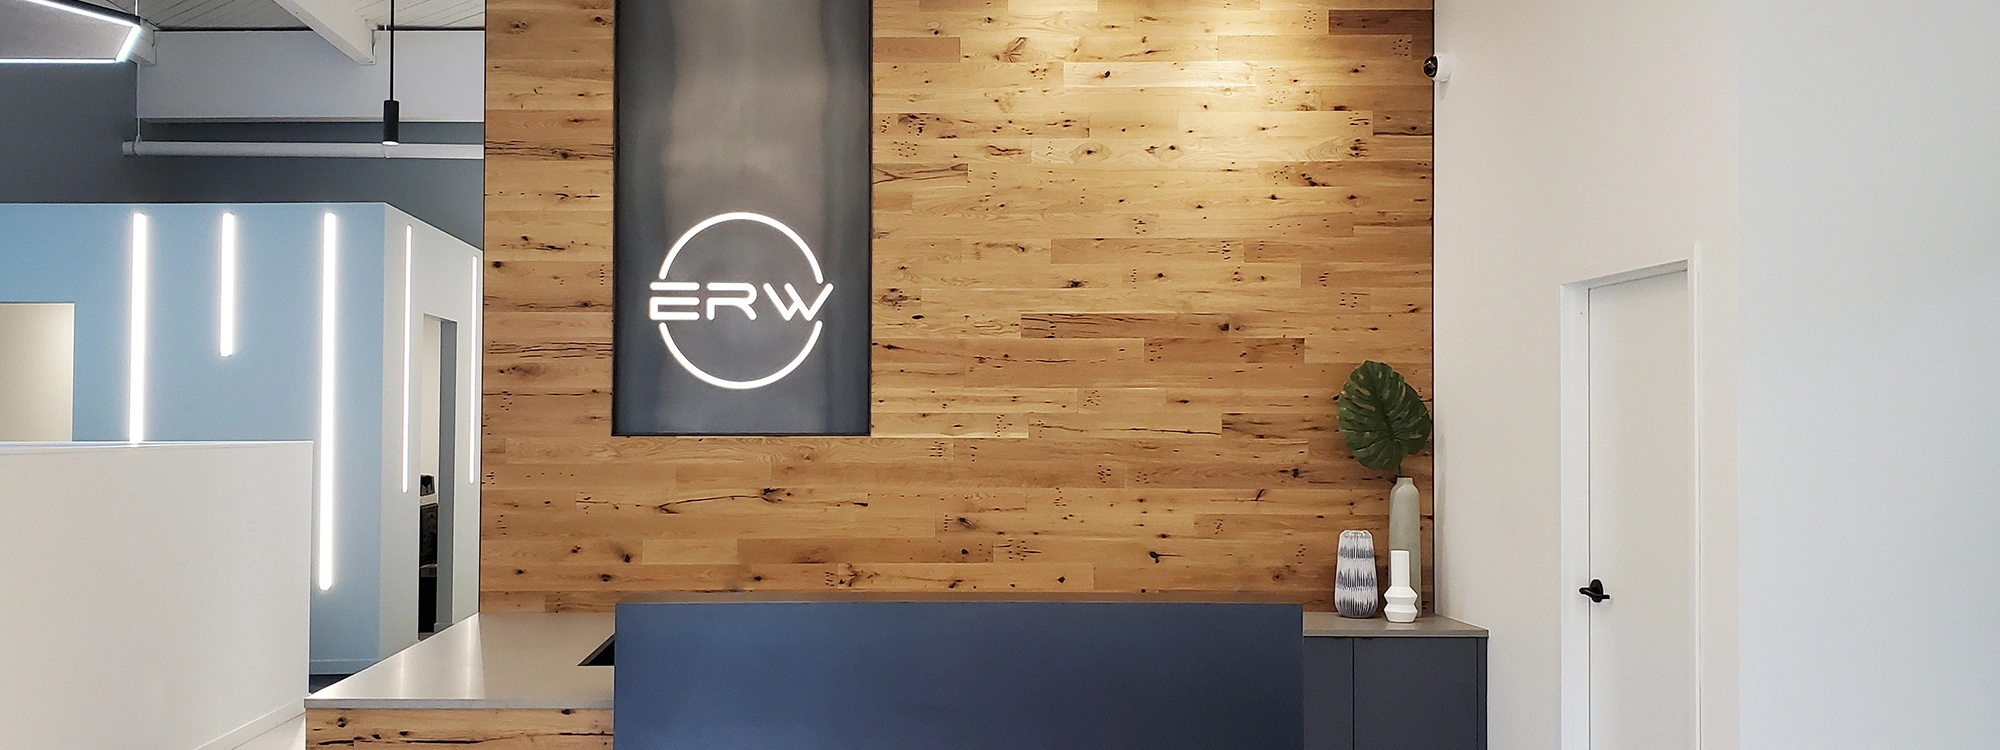 Photo of reception desk at the ERW Showroom